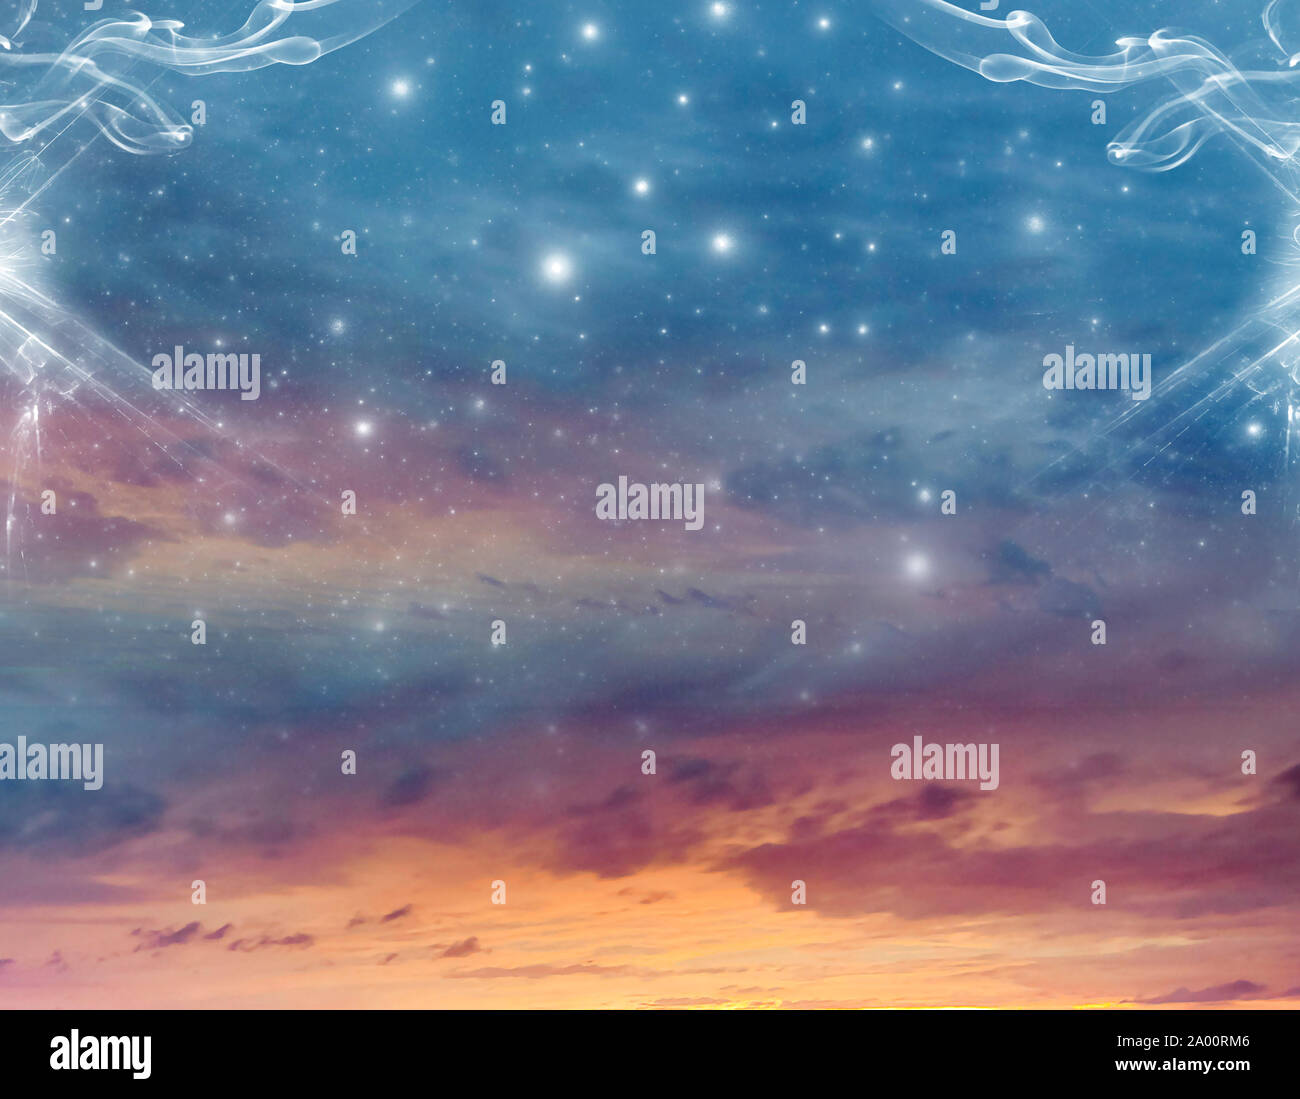 abstract mystical background with sky, clouds, space, stars Stock Photo